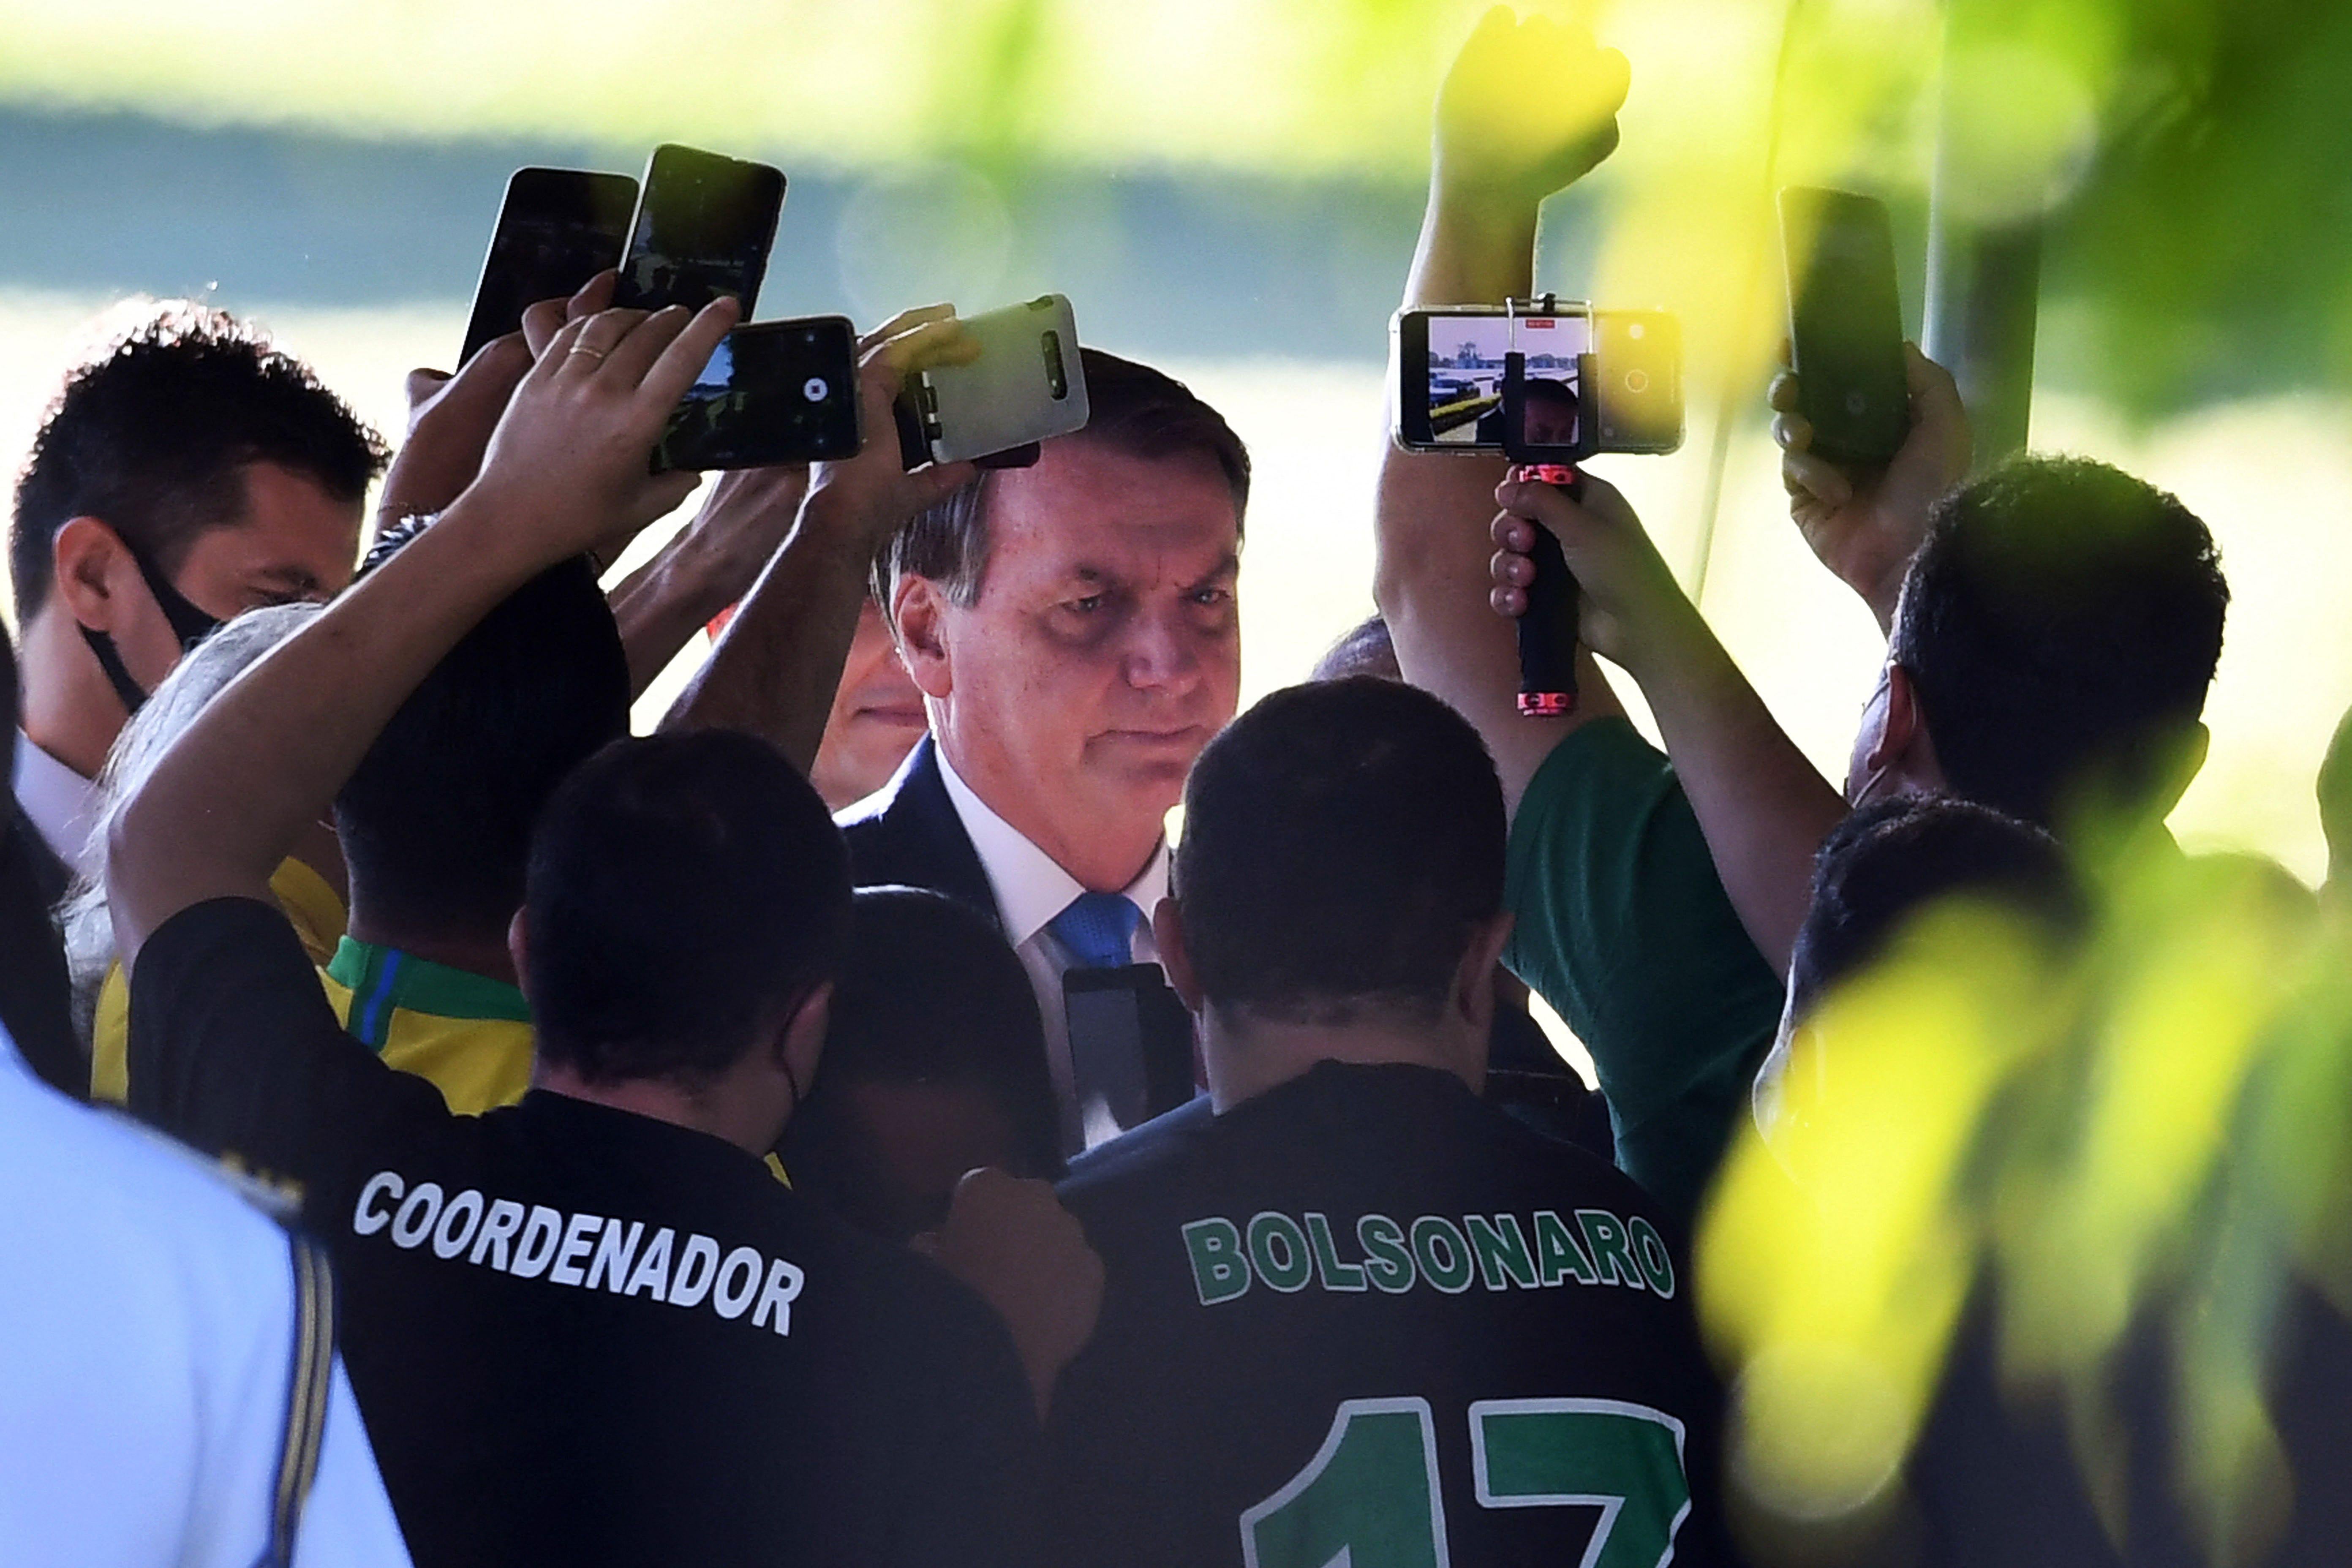 Bolsonaro thronged by people recording him on cellphones